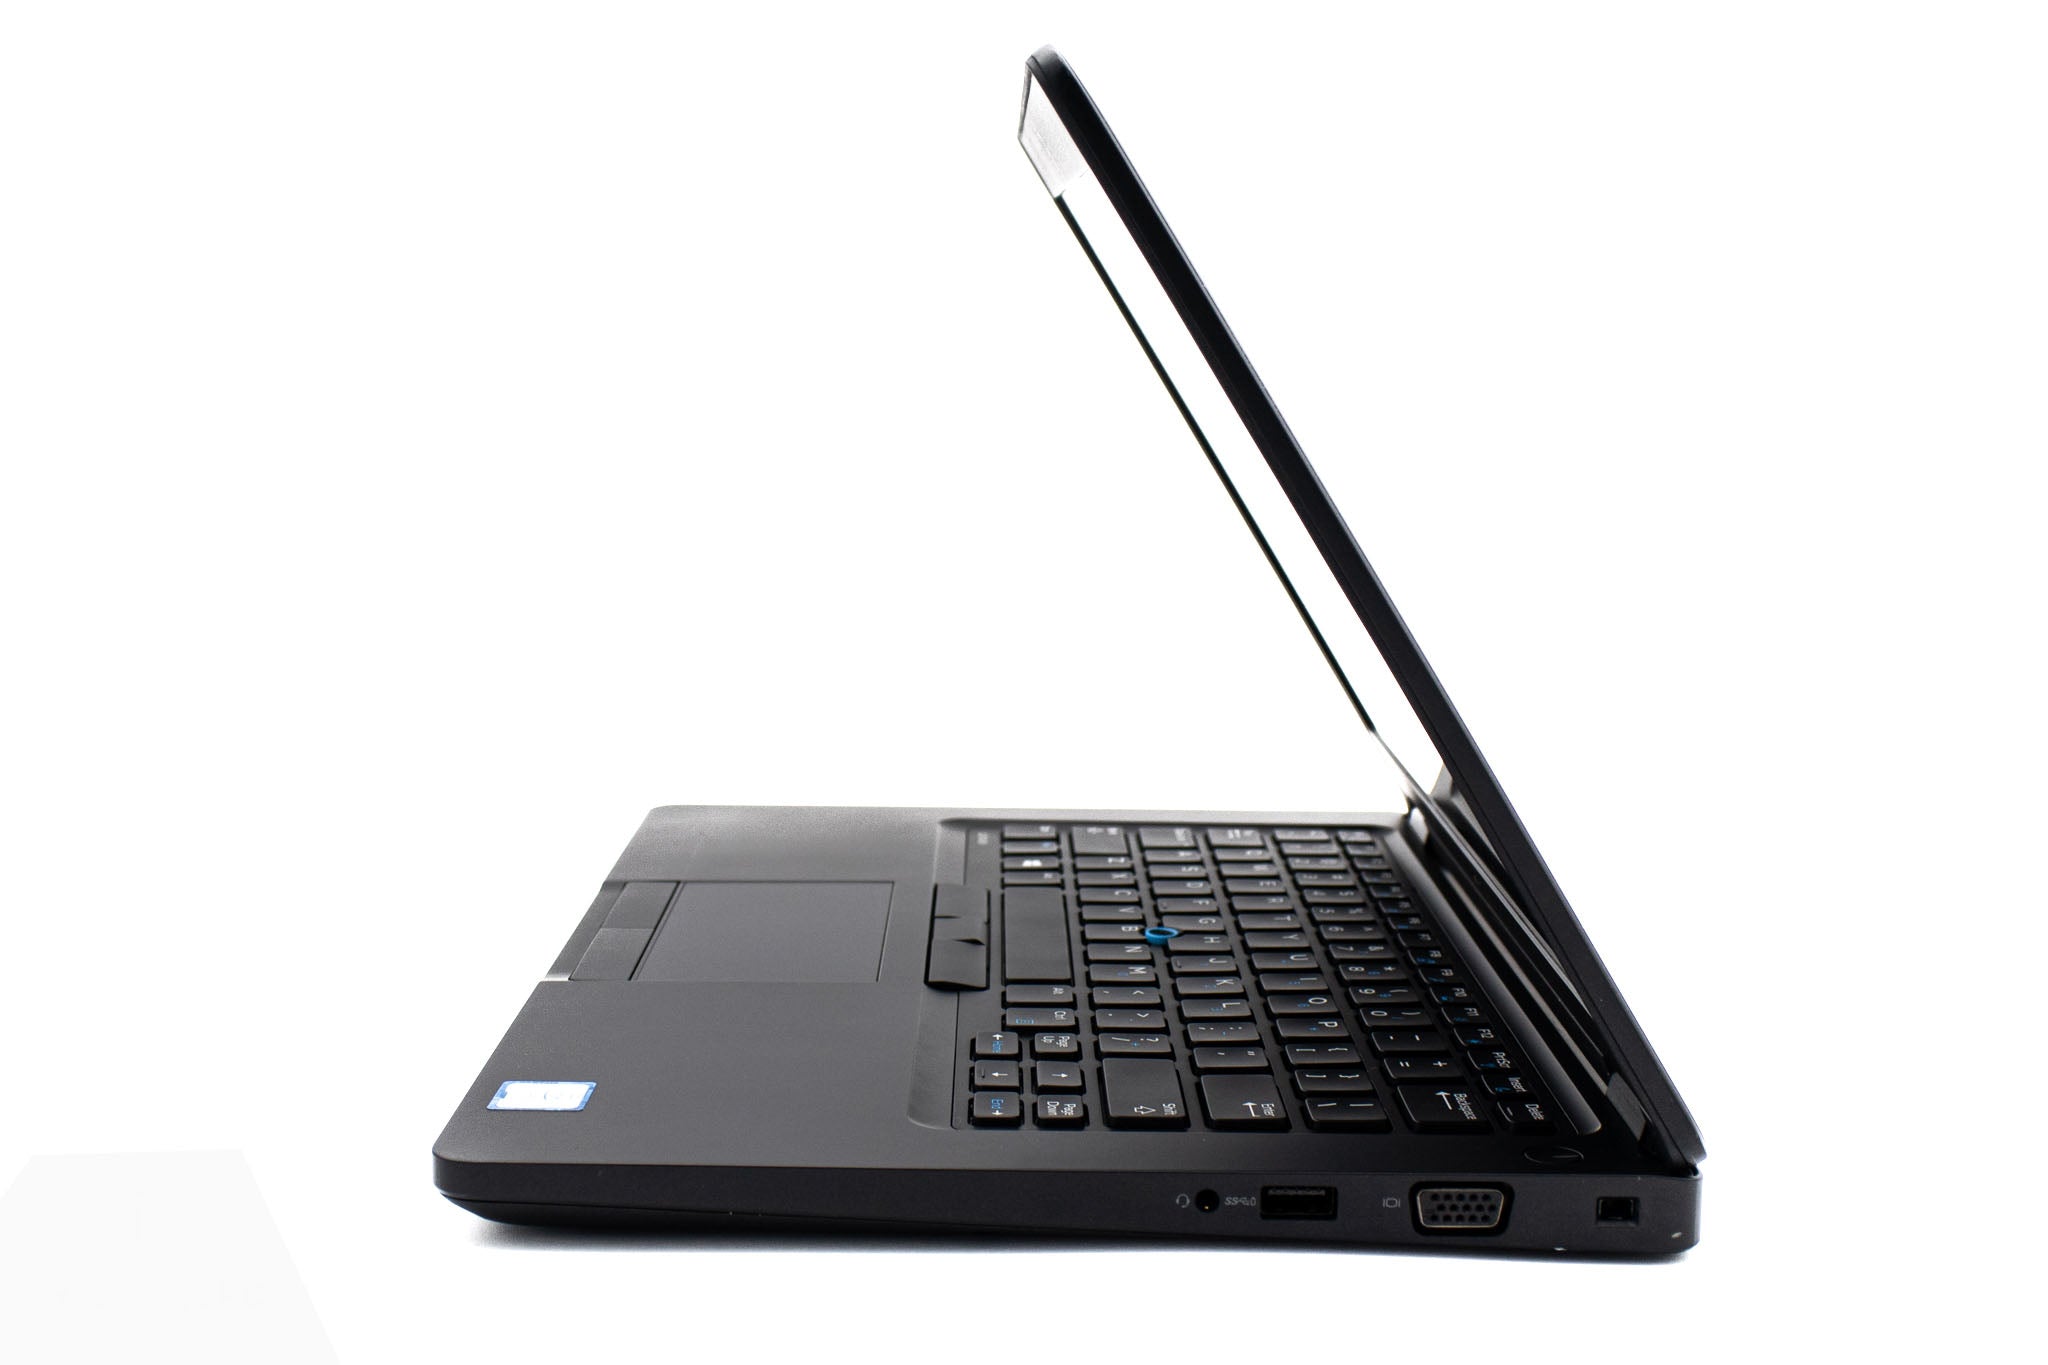 Refurbished Dell Latitude E5480 Laptop Computer, Intel Core i5, 128GB Solid State Hard Drive, 16GB Ram, Windows 11 Operating System One Year Warranty